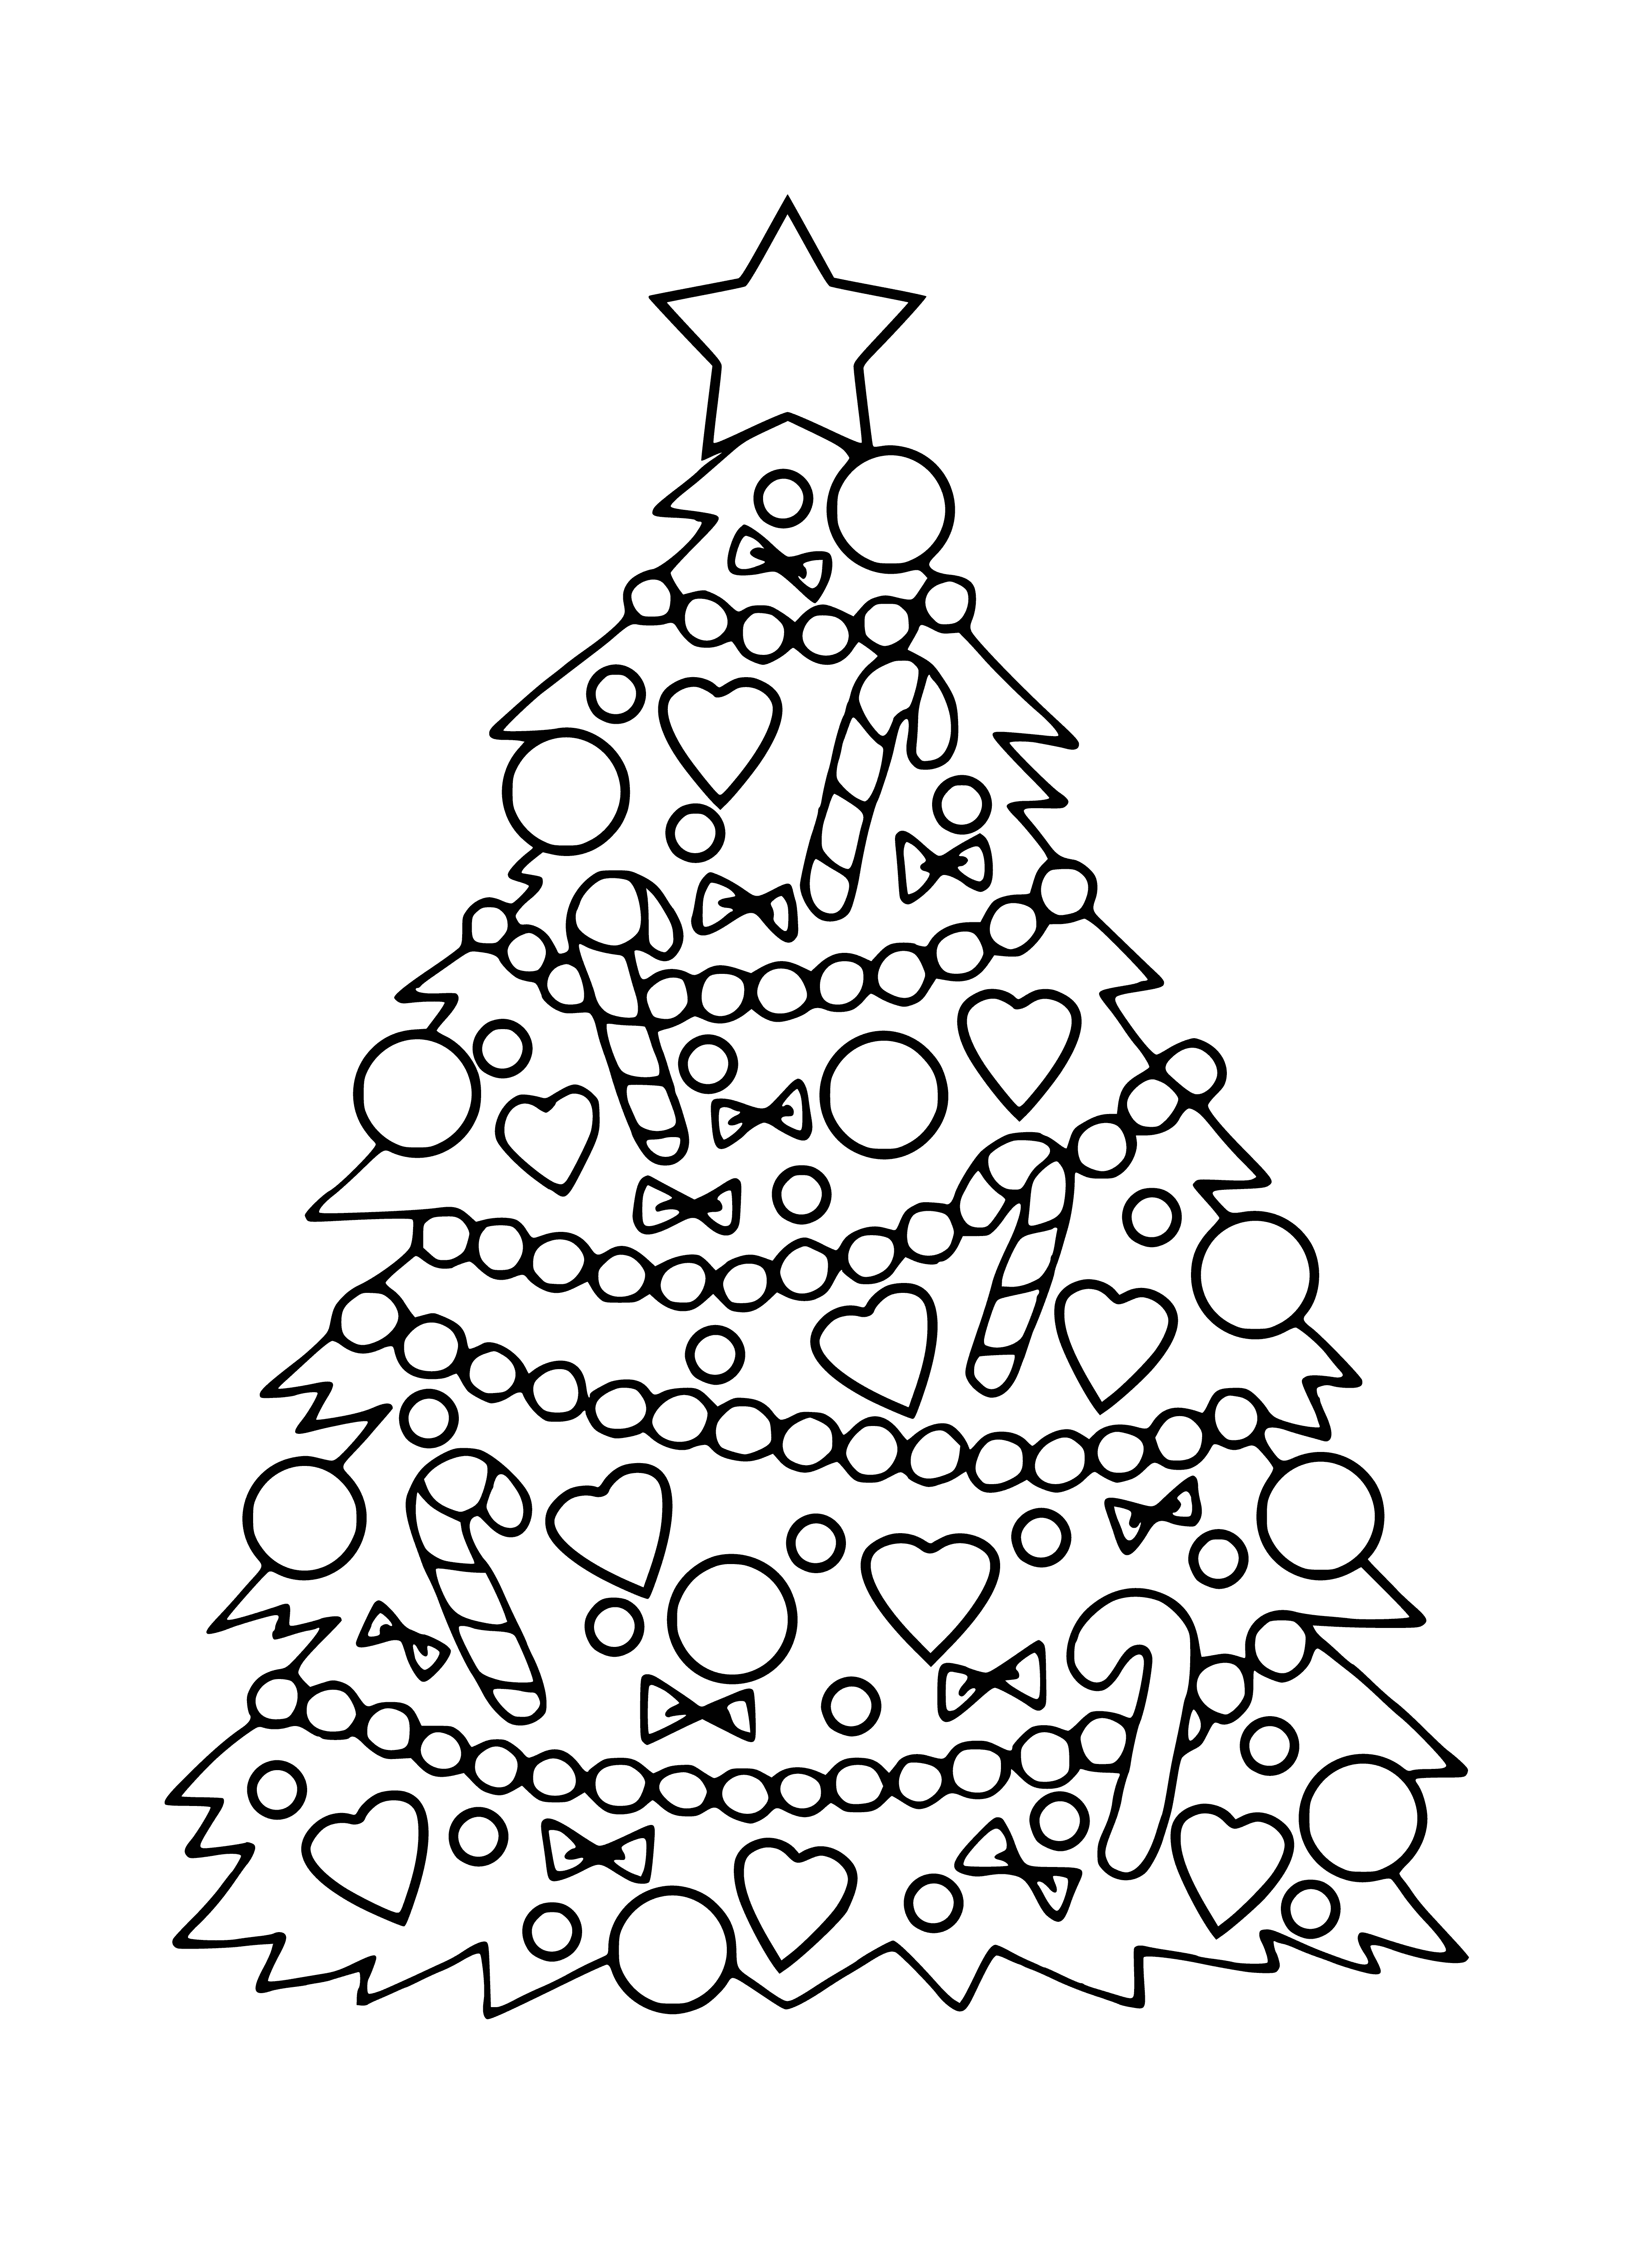 Two Christmas trees with different ornaments & patterns. One with green star, one with red bow. Standing before a cozy fireplace. #Christmas #Coloring